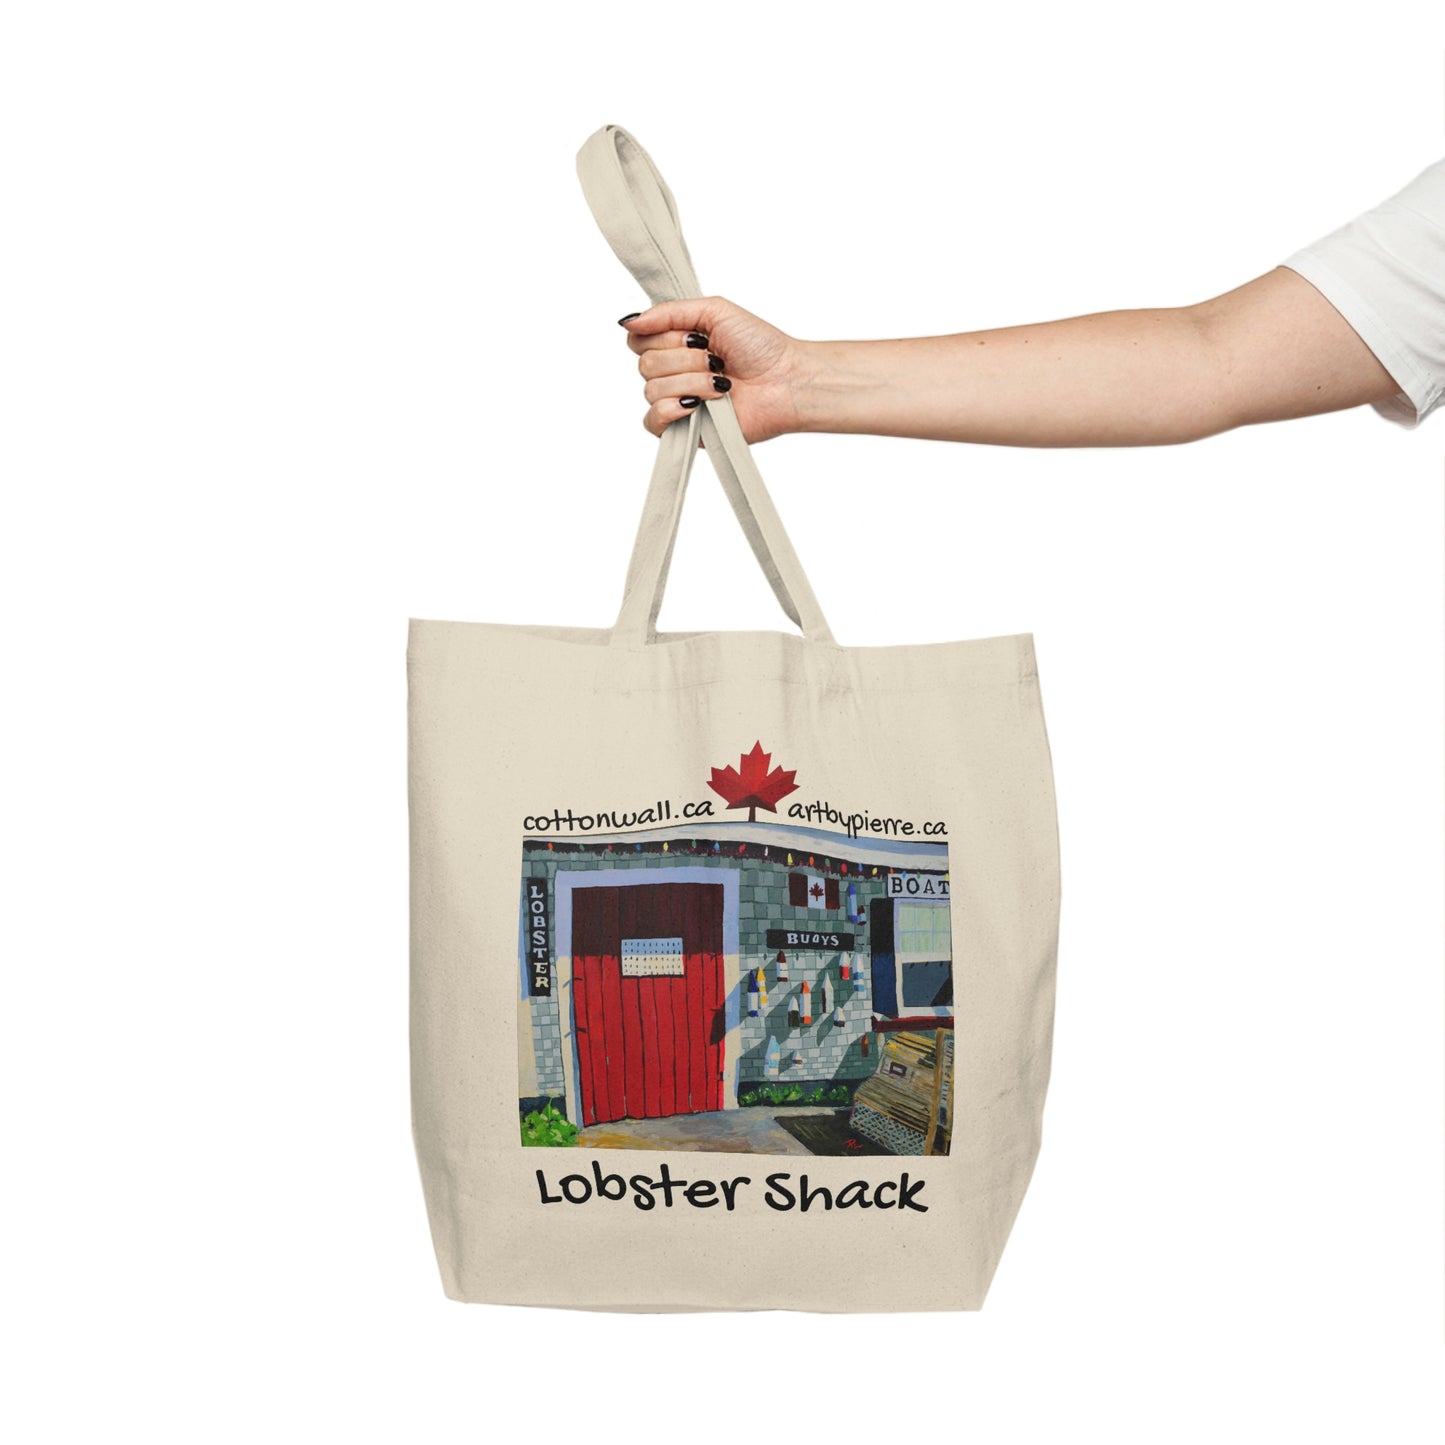 Lobster Shack - Canvas Shopping Tote